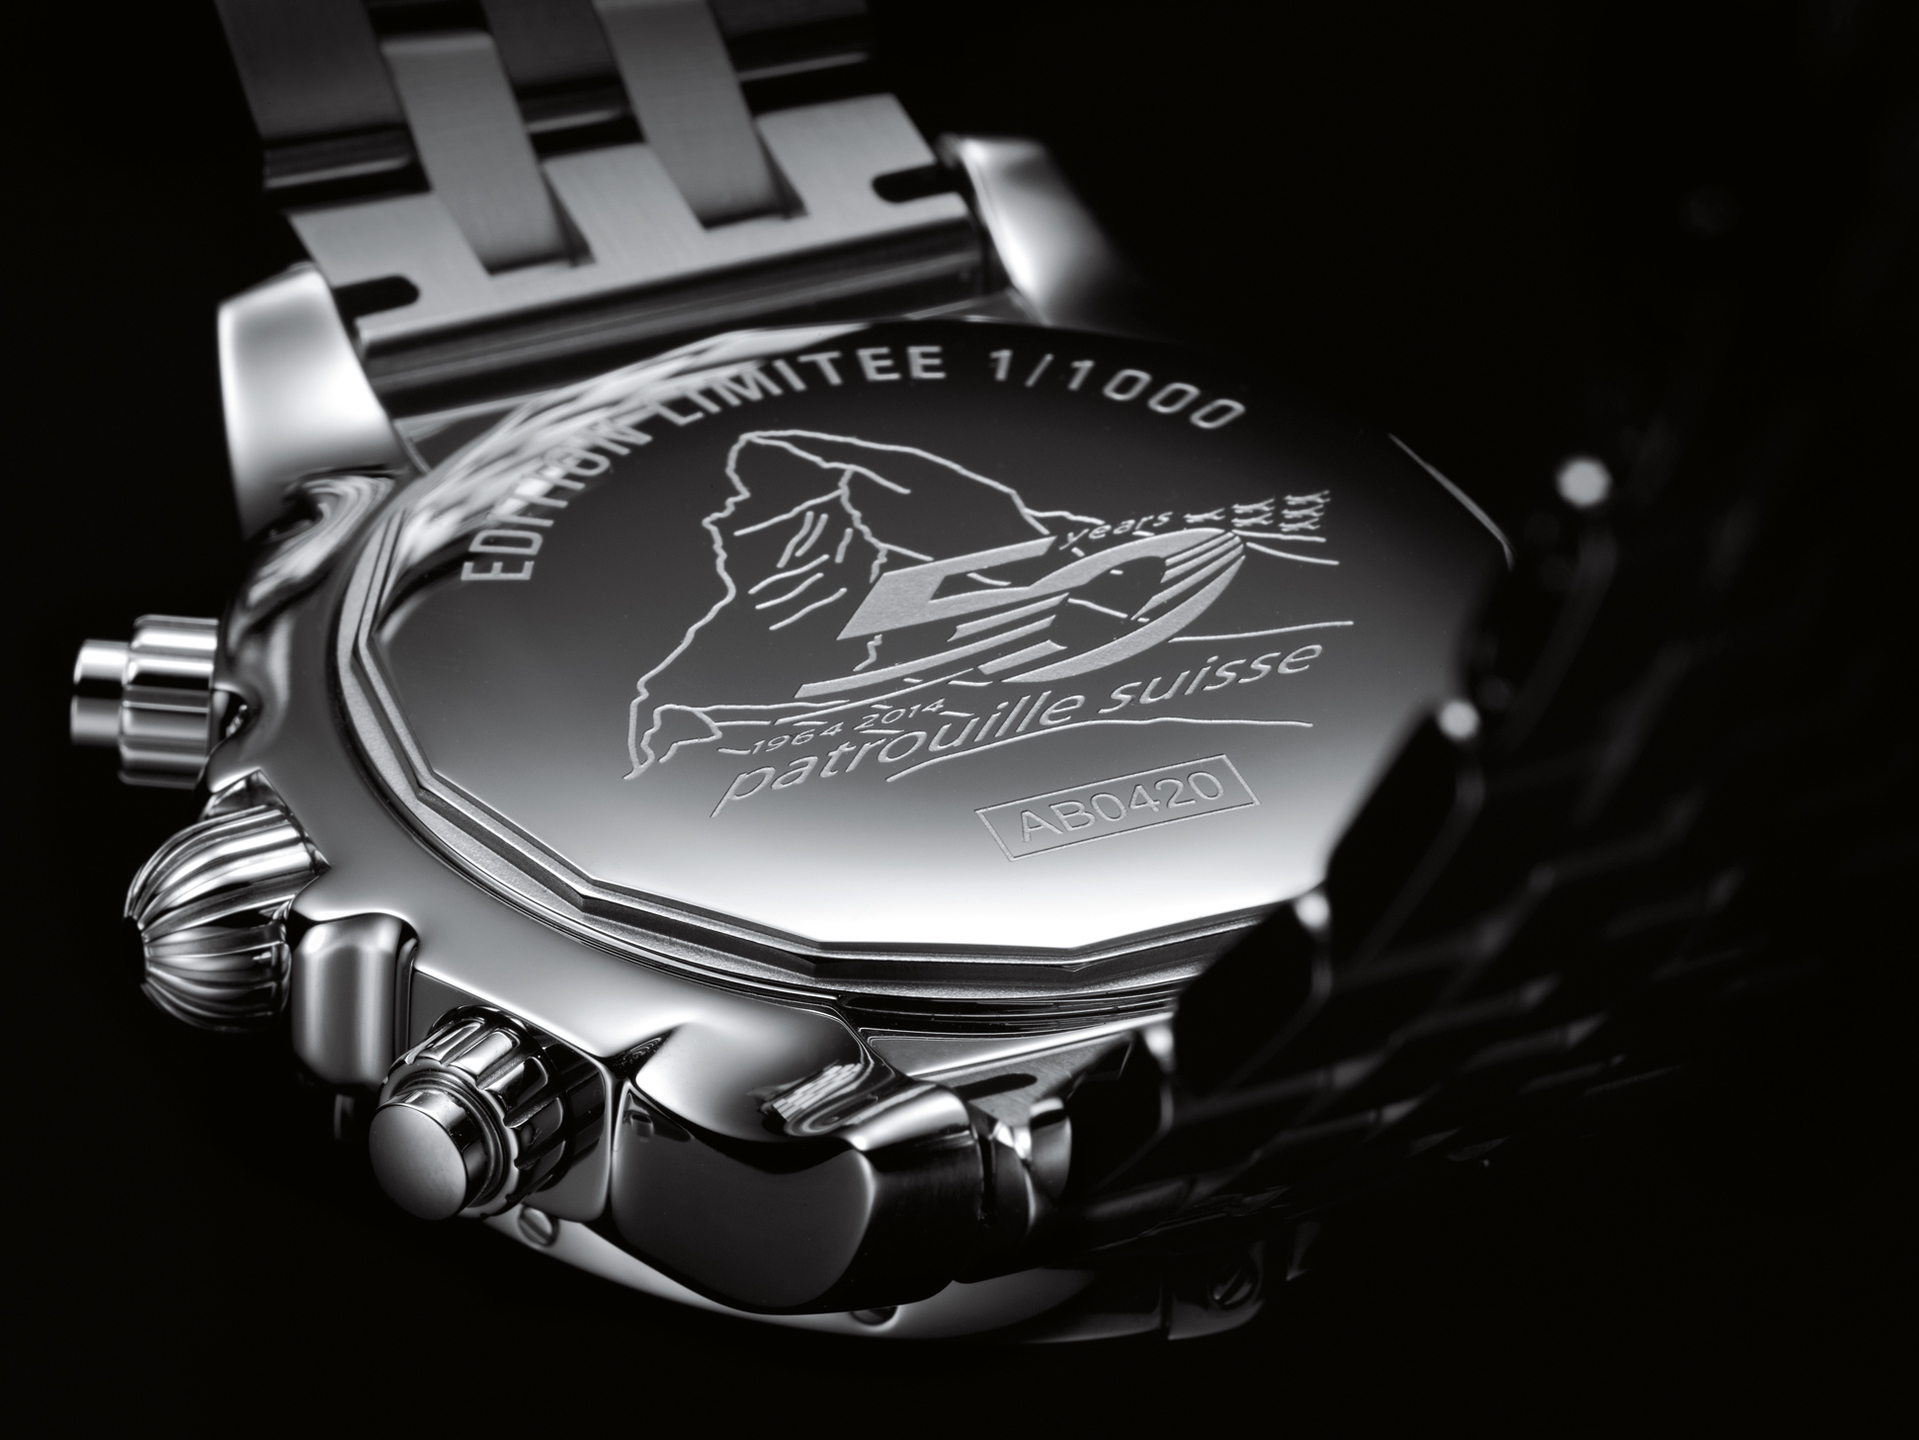 There is no new Novo for the breitling Limited Edition Bentley Watch